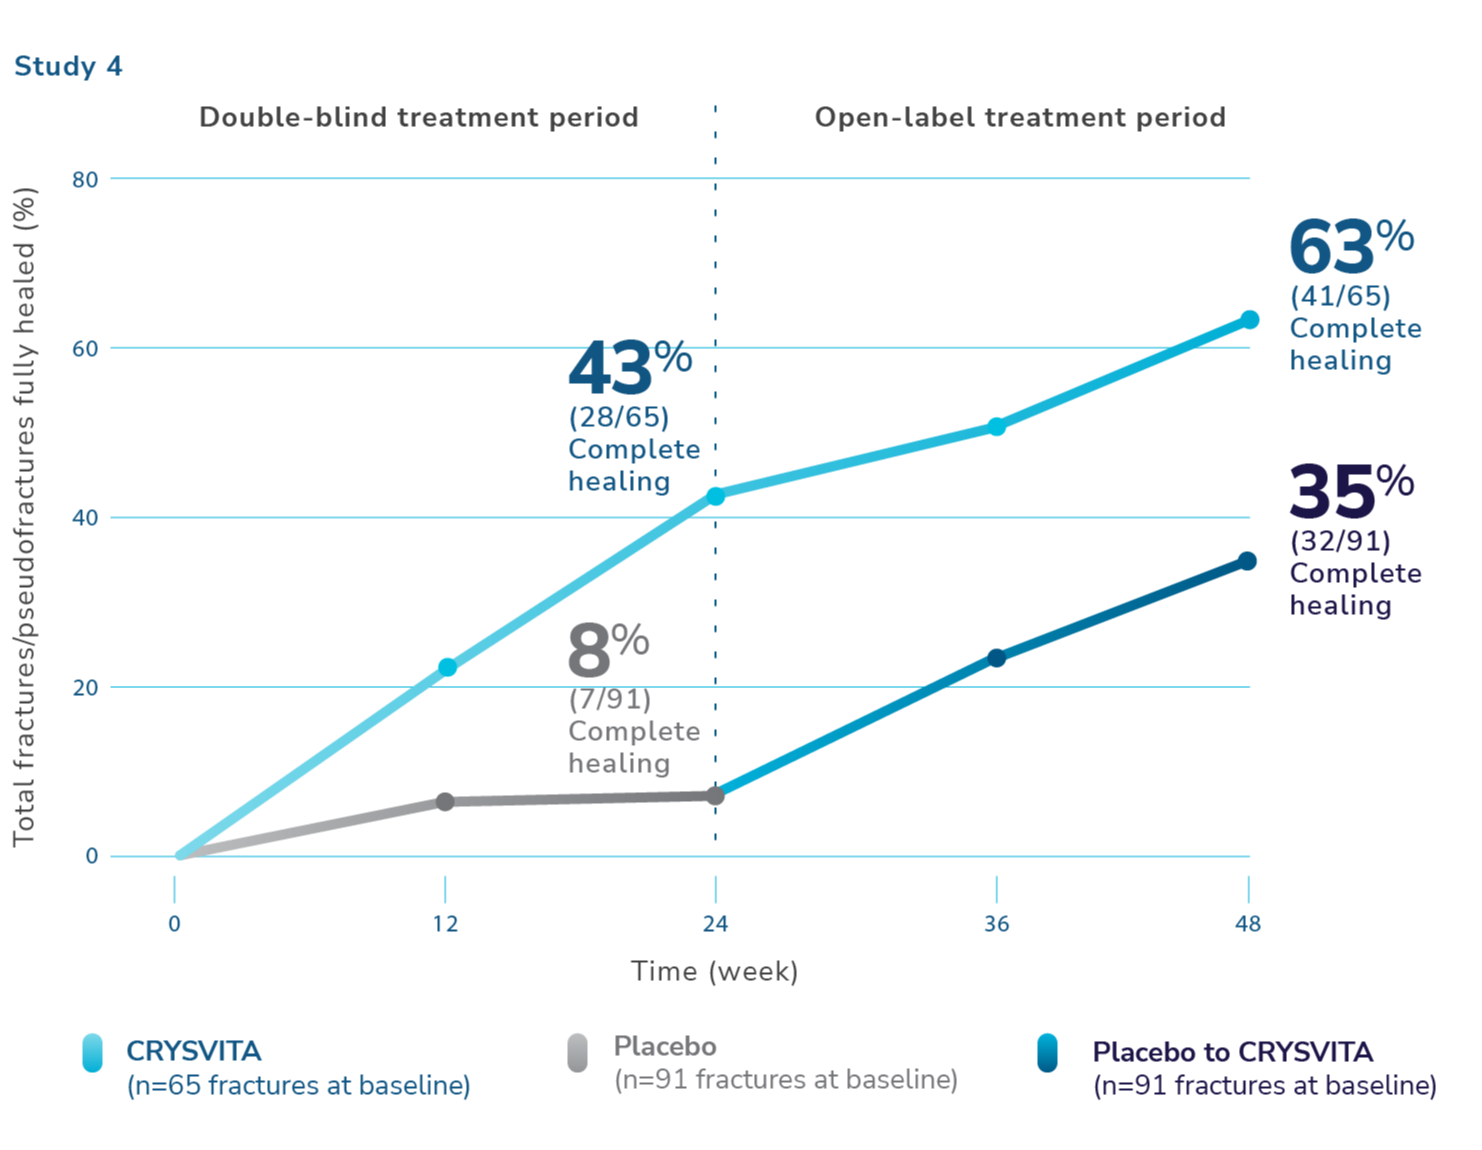 Line graph showing how switching to CRYSVITA from placebo led to a higher rate of fracture healing; 43% of patients demonstrated complete healing with CRYSVITA vs 8% of patients on placebo during the double-blind treatment period; 63% of patients demonstrated complete healing with CRYSVITA vs 35% of patients on placebo during the open-label treatment period